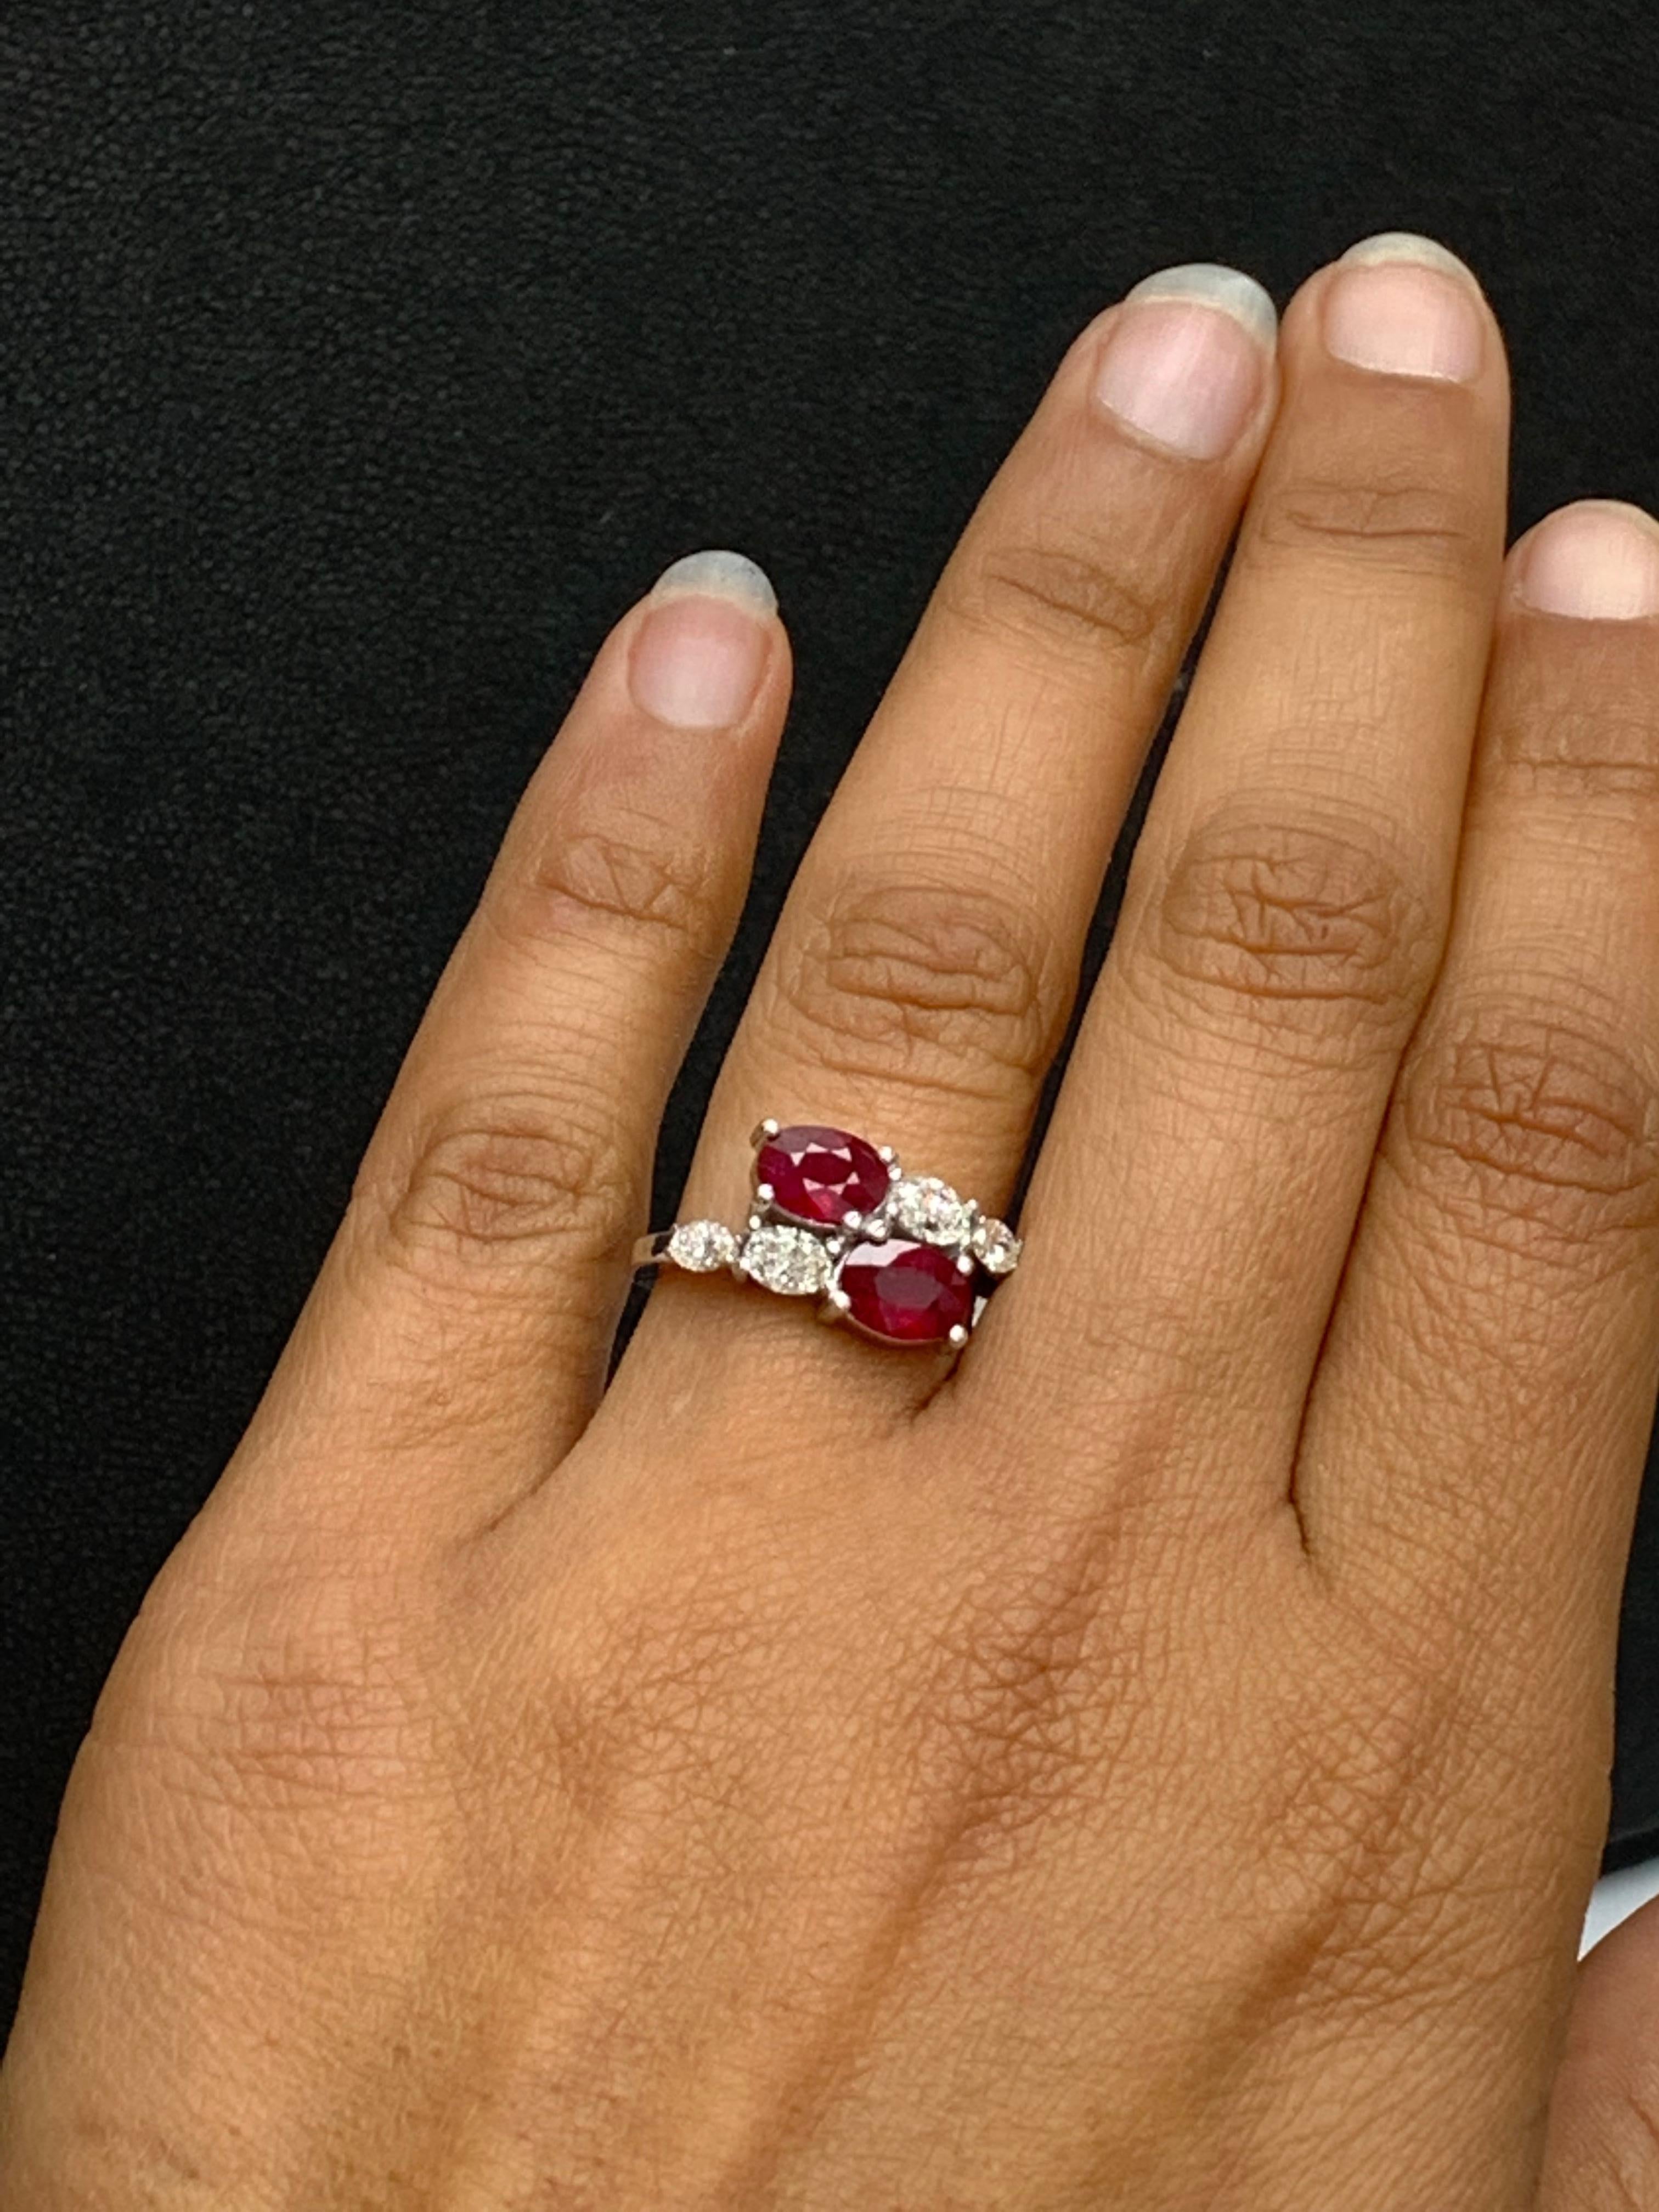 1.54 Carat Oval Cut Ruby Diamond Toi Et Moi Engagement Ring in 14K White Gold For Sale 2